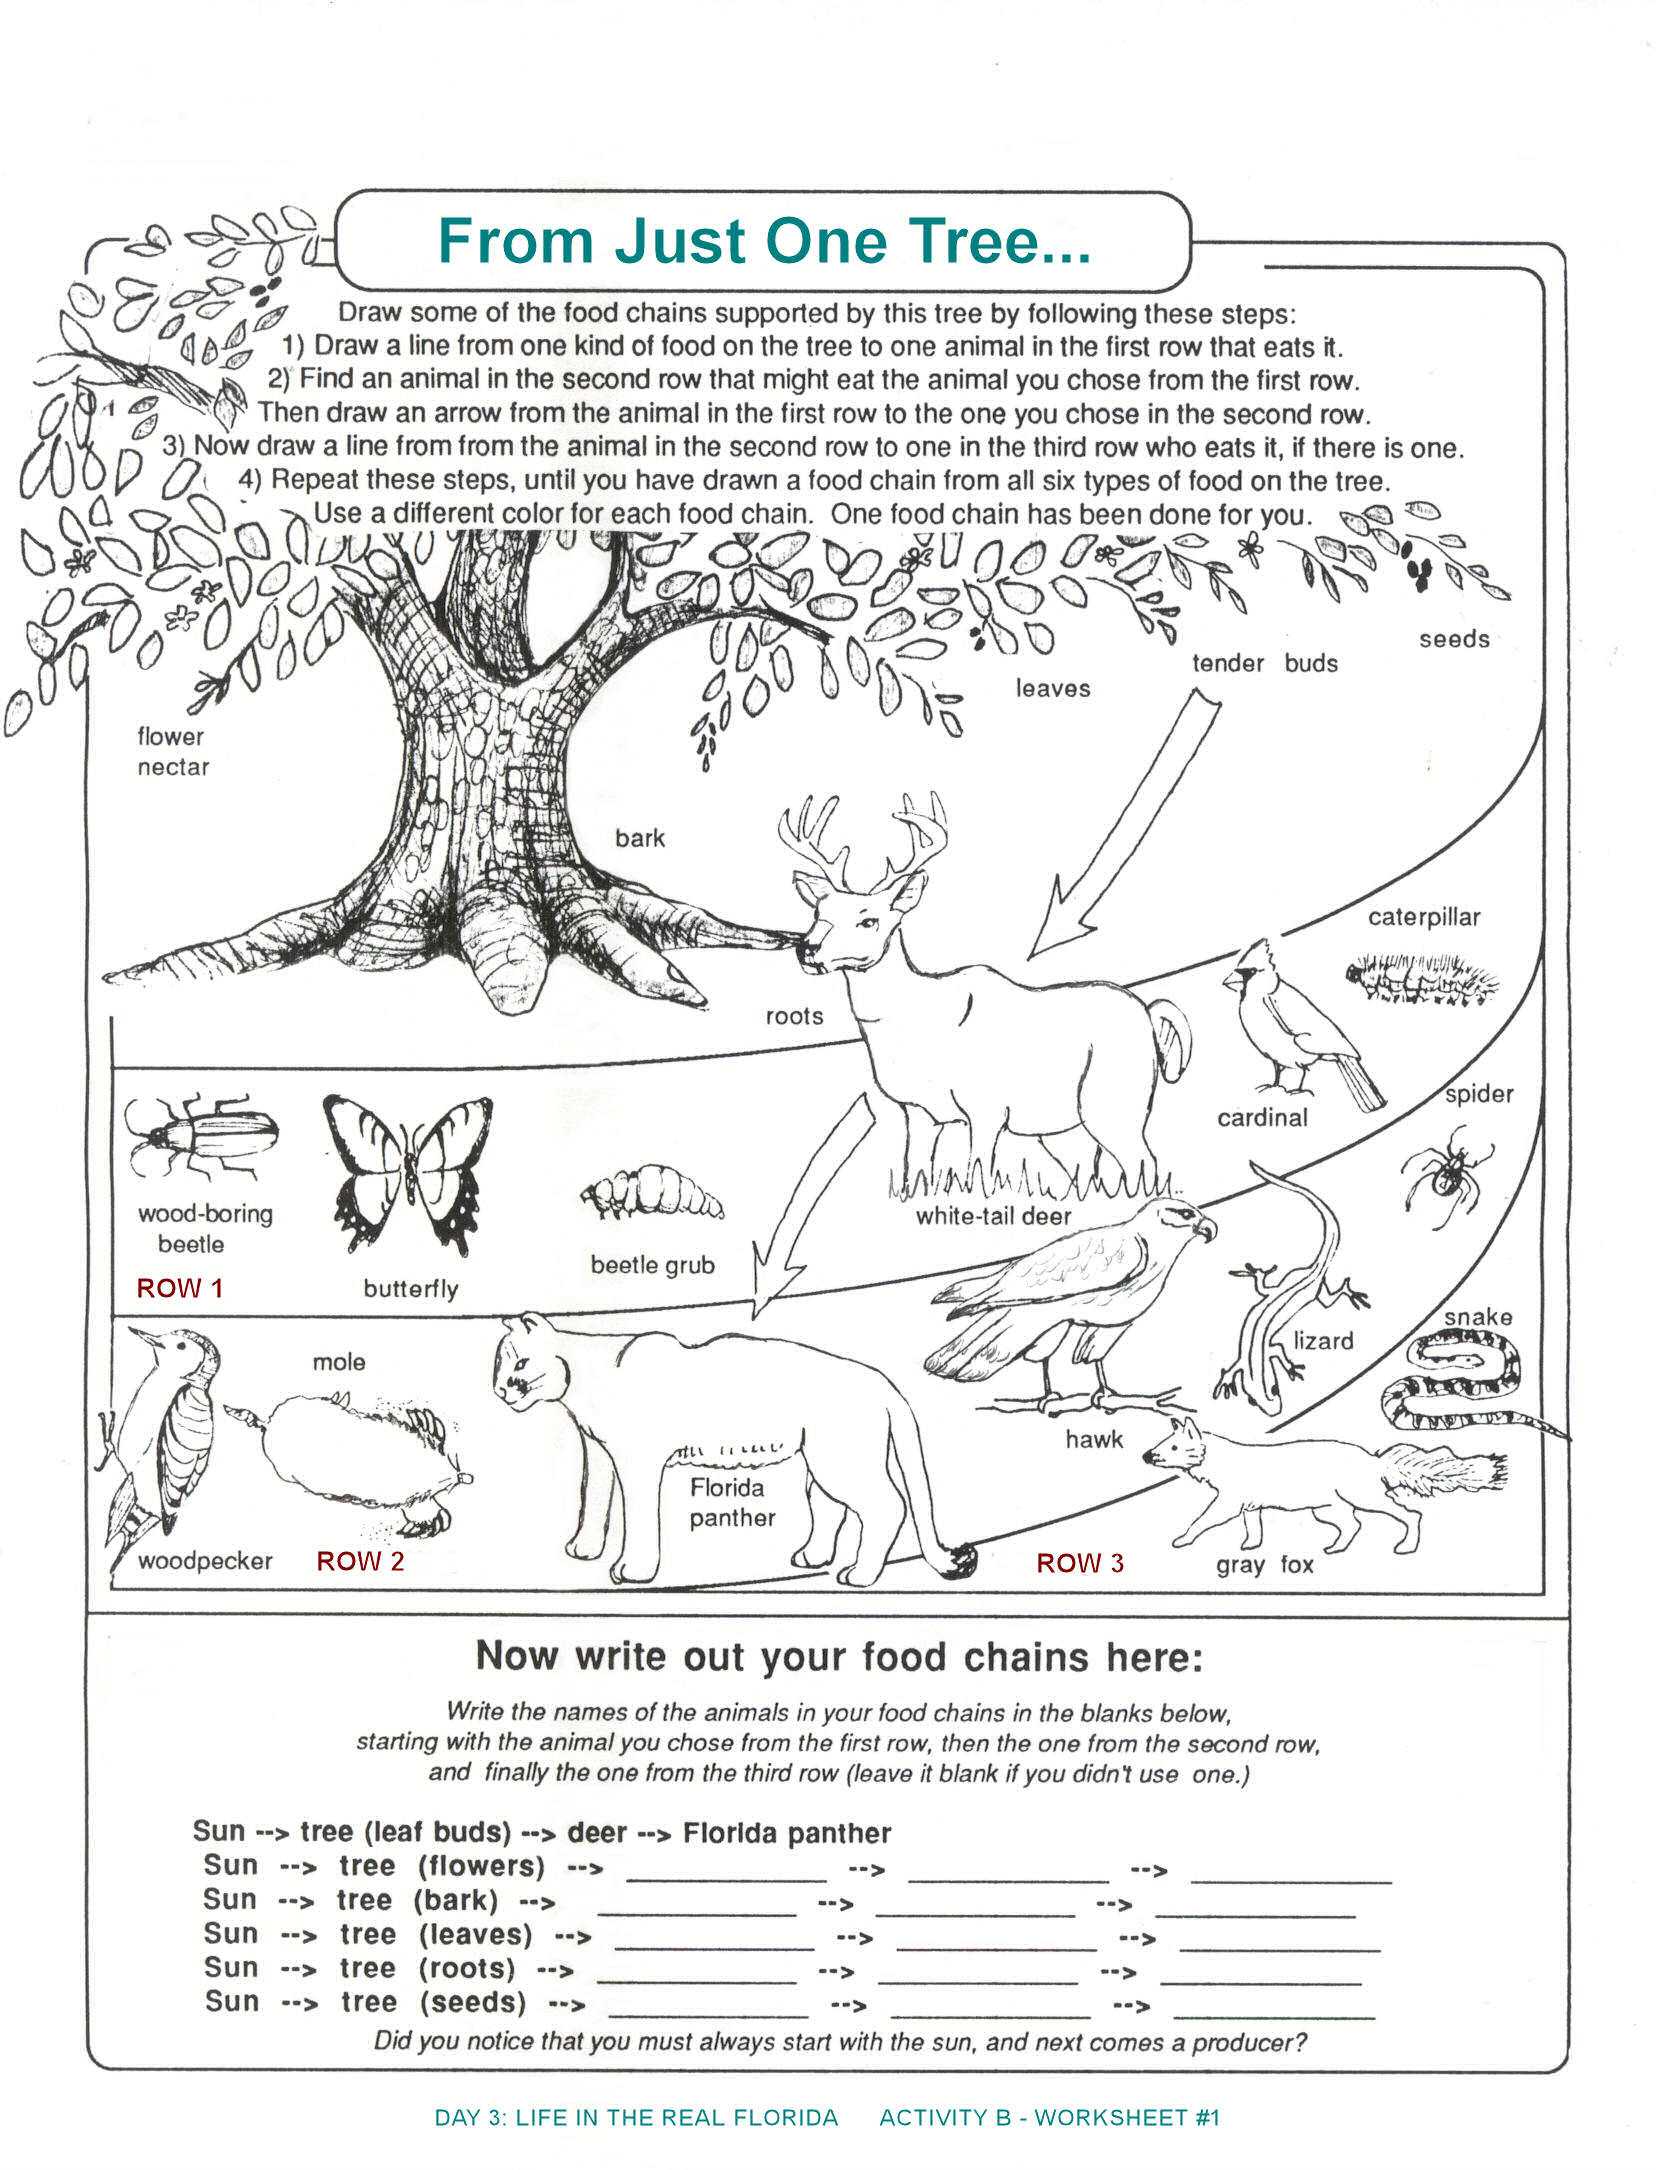 Food Chains and Webs Worksheet together with Food Webs and Food Chains Worksheet Inspirational 58 Best Food